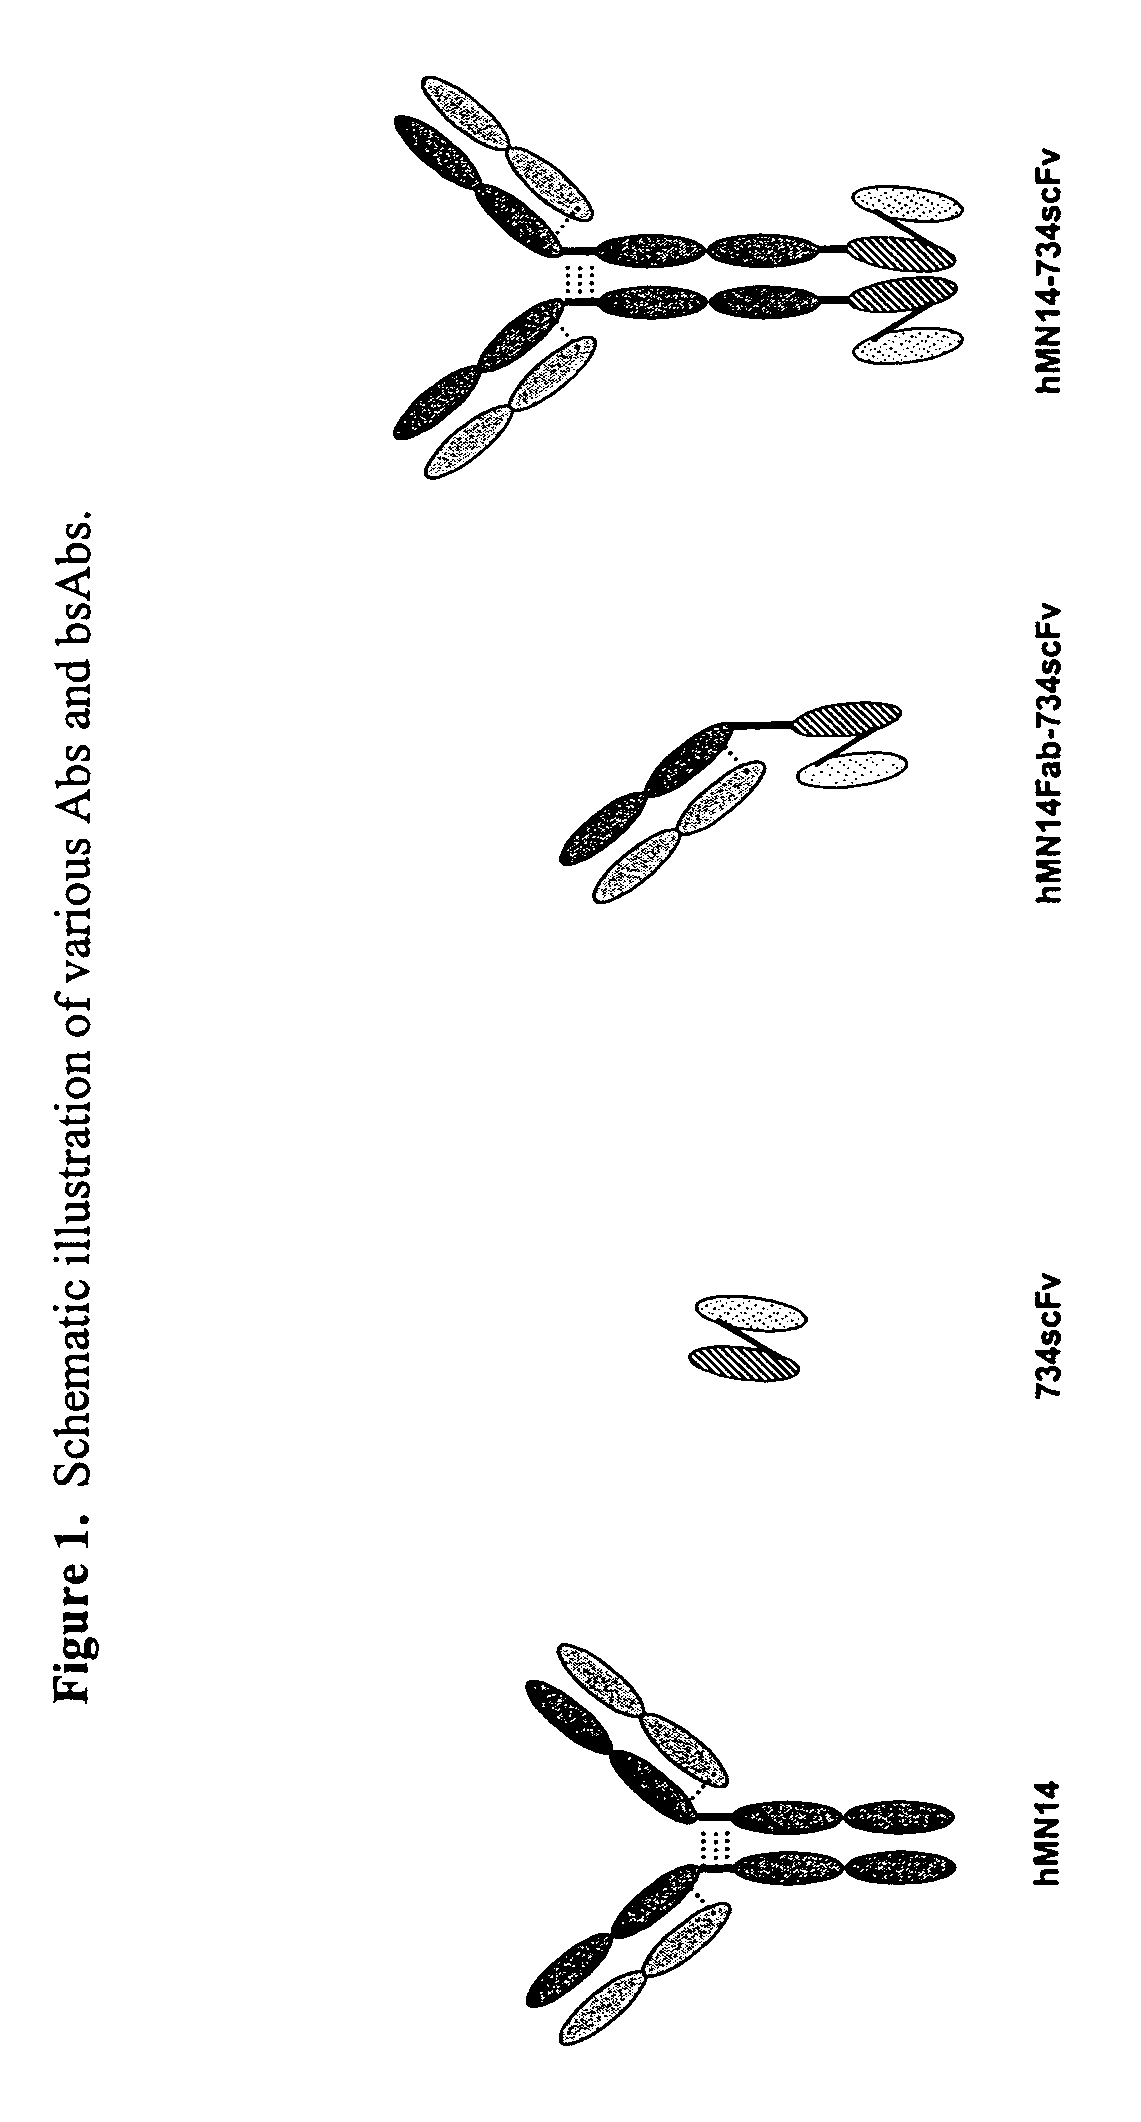 Bi-specific antibodies for pre-targeting diagnosis and therapy